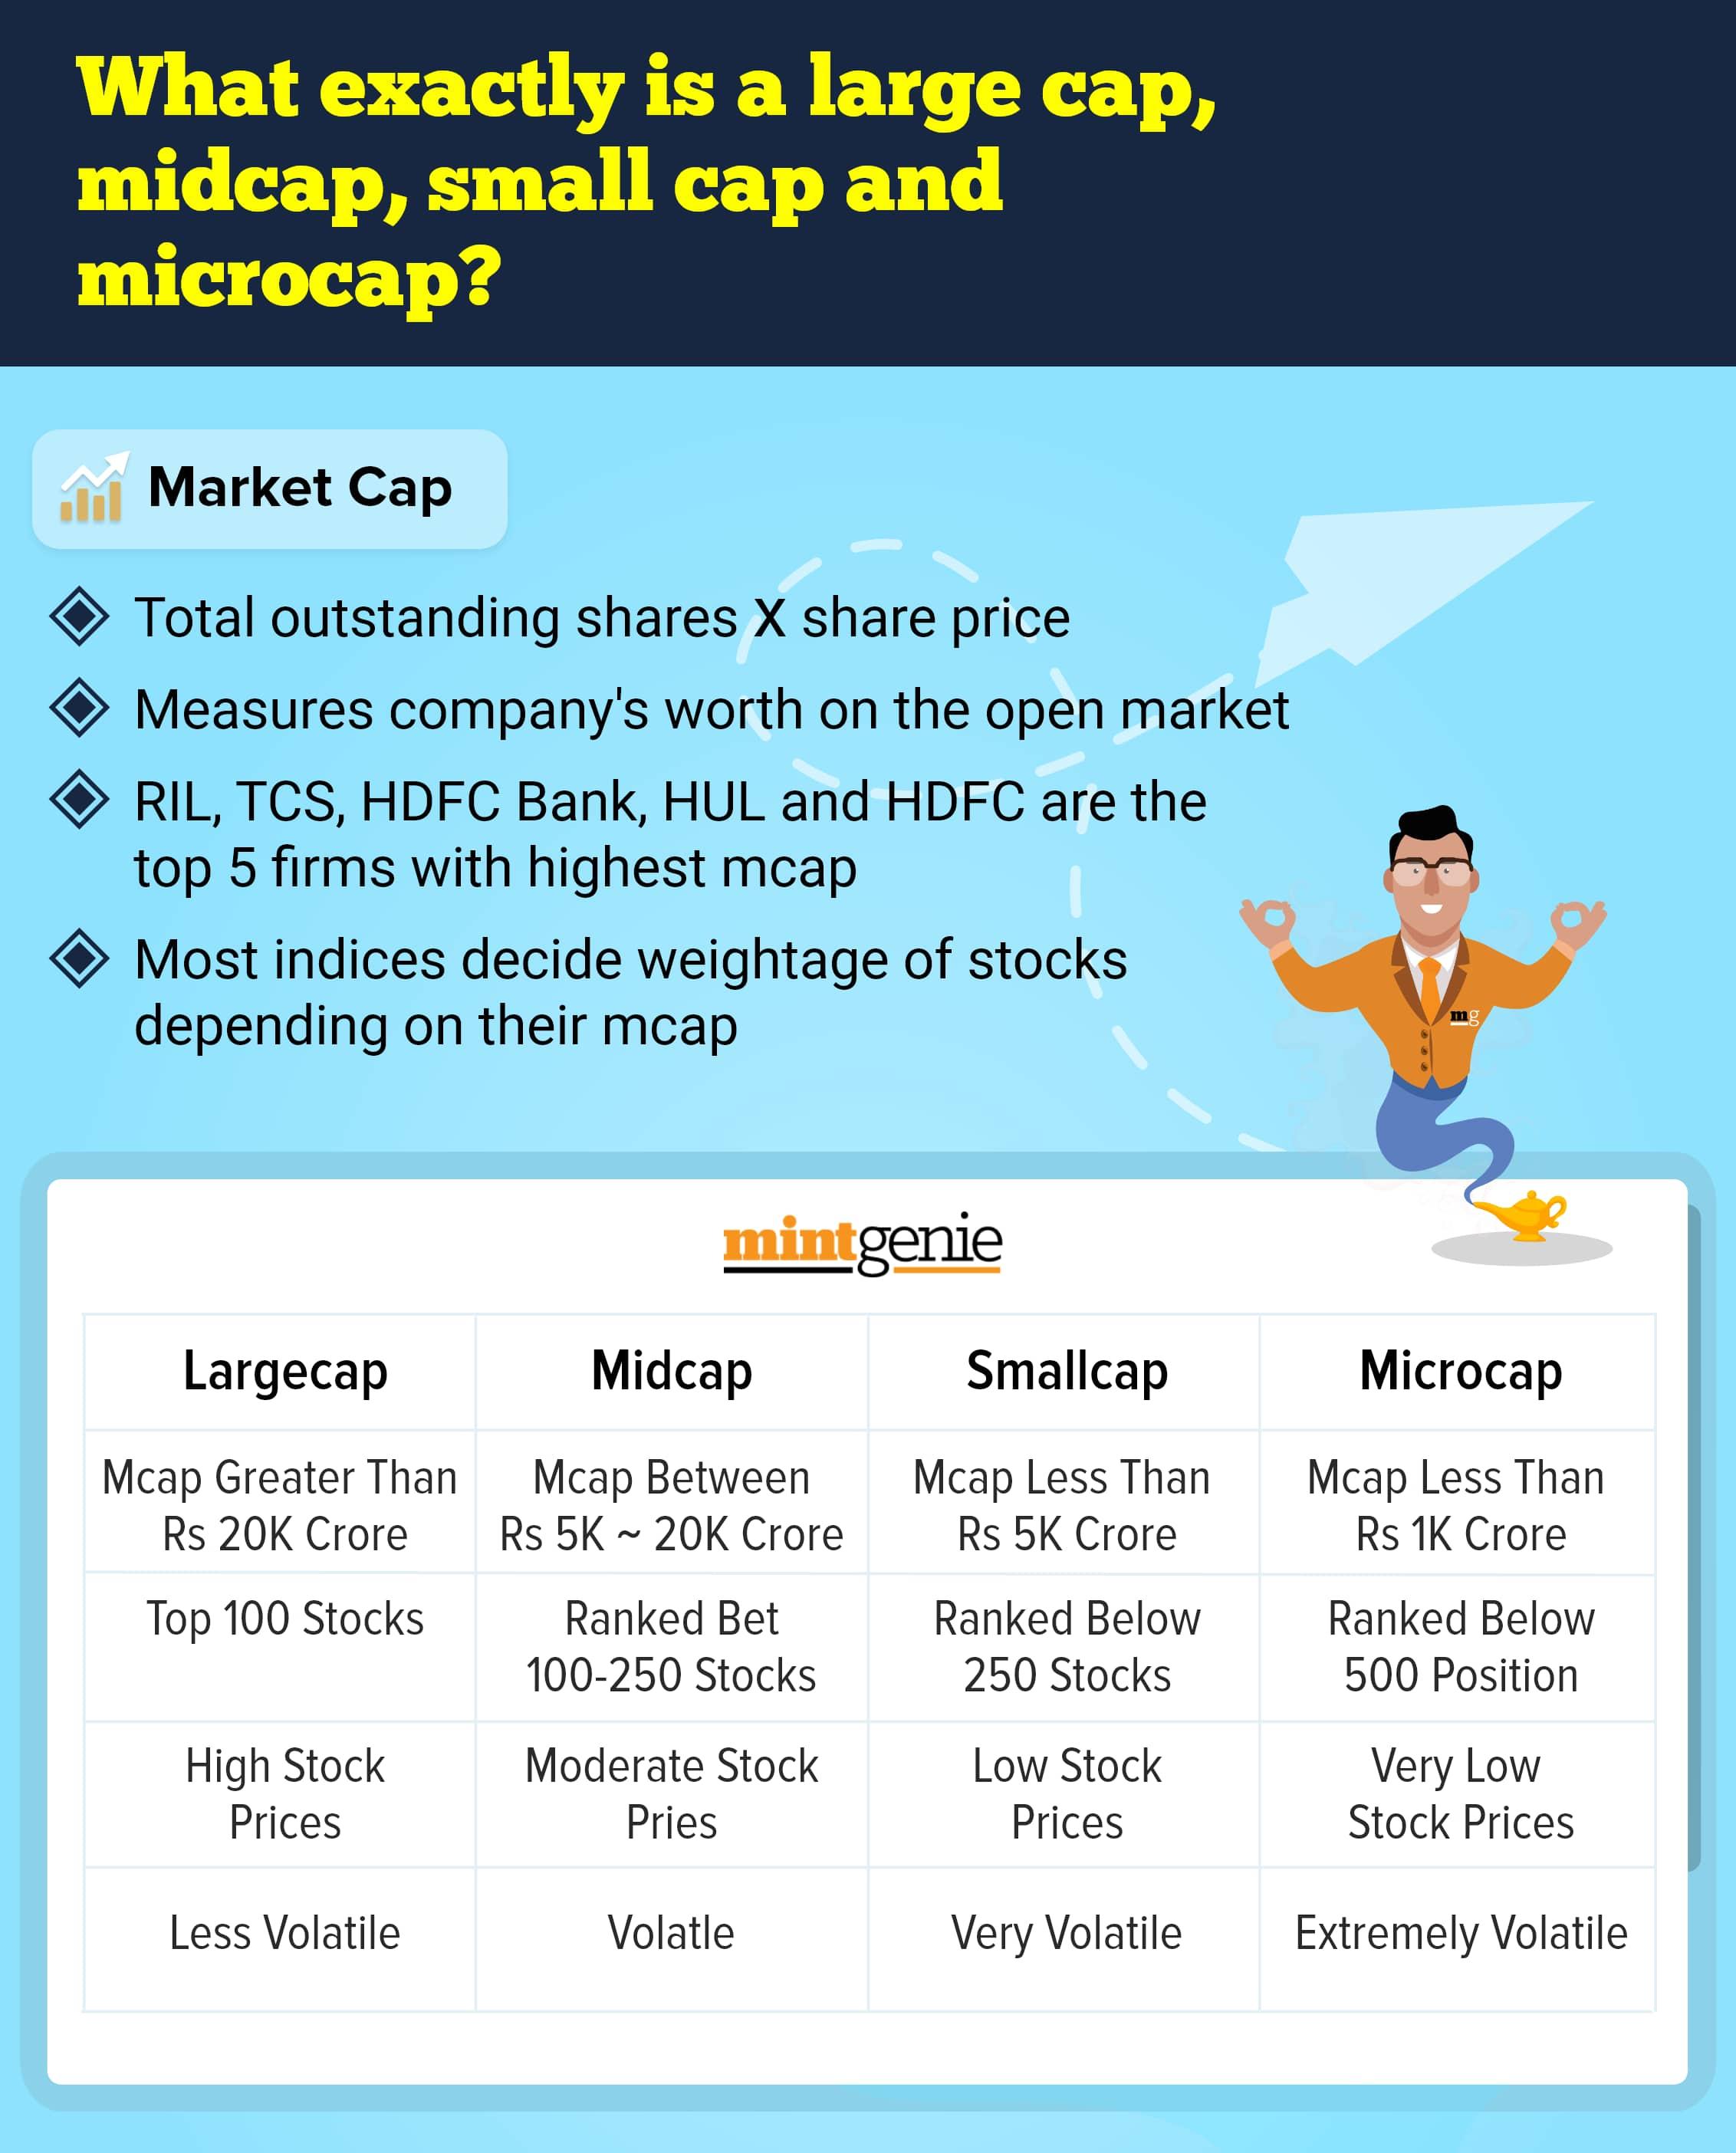 Let's understand the different market caps